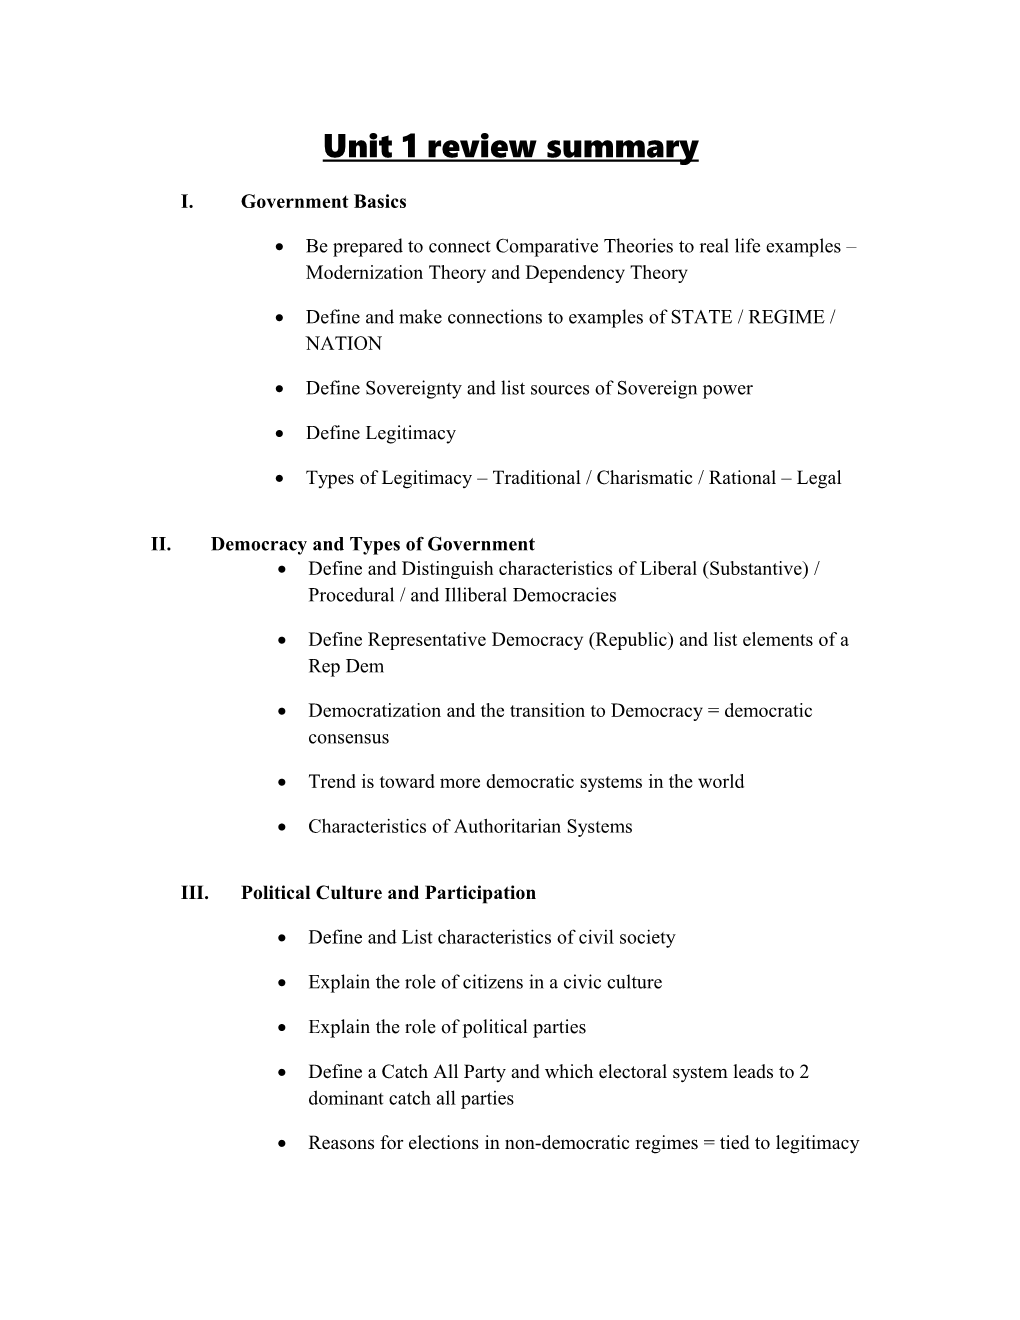 Unit 1 Review Summary